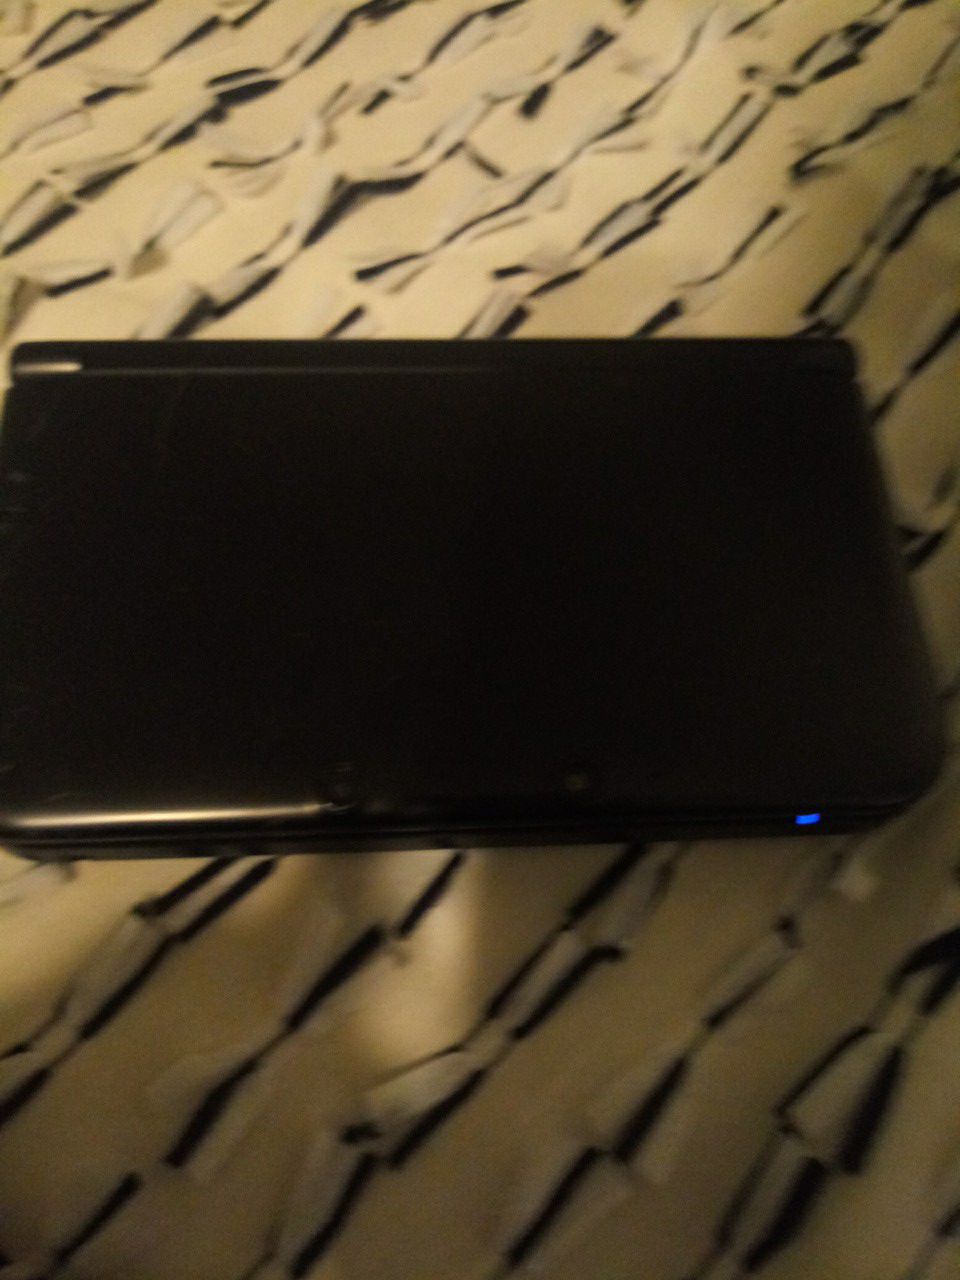 Nintendo 3ds xl with game